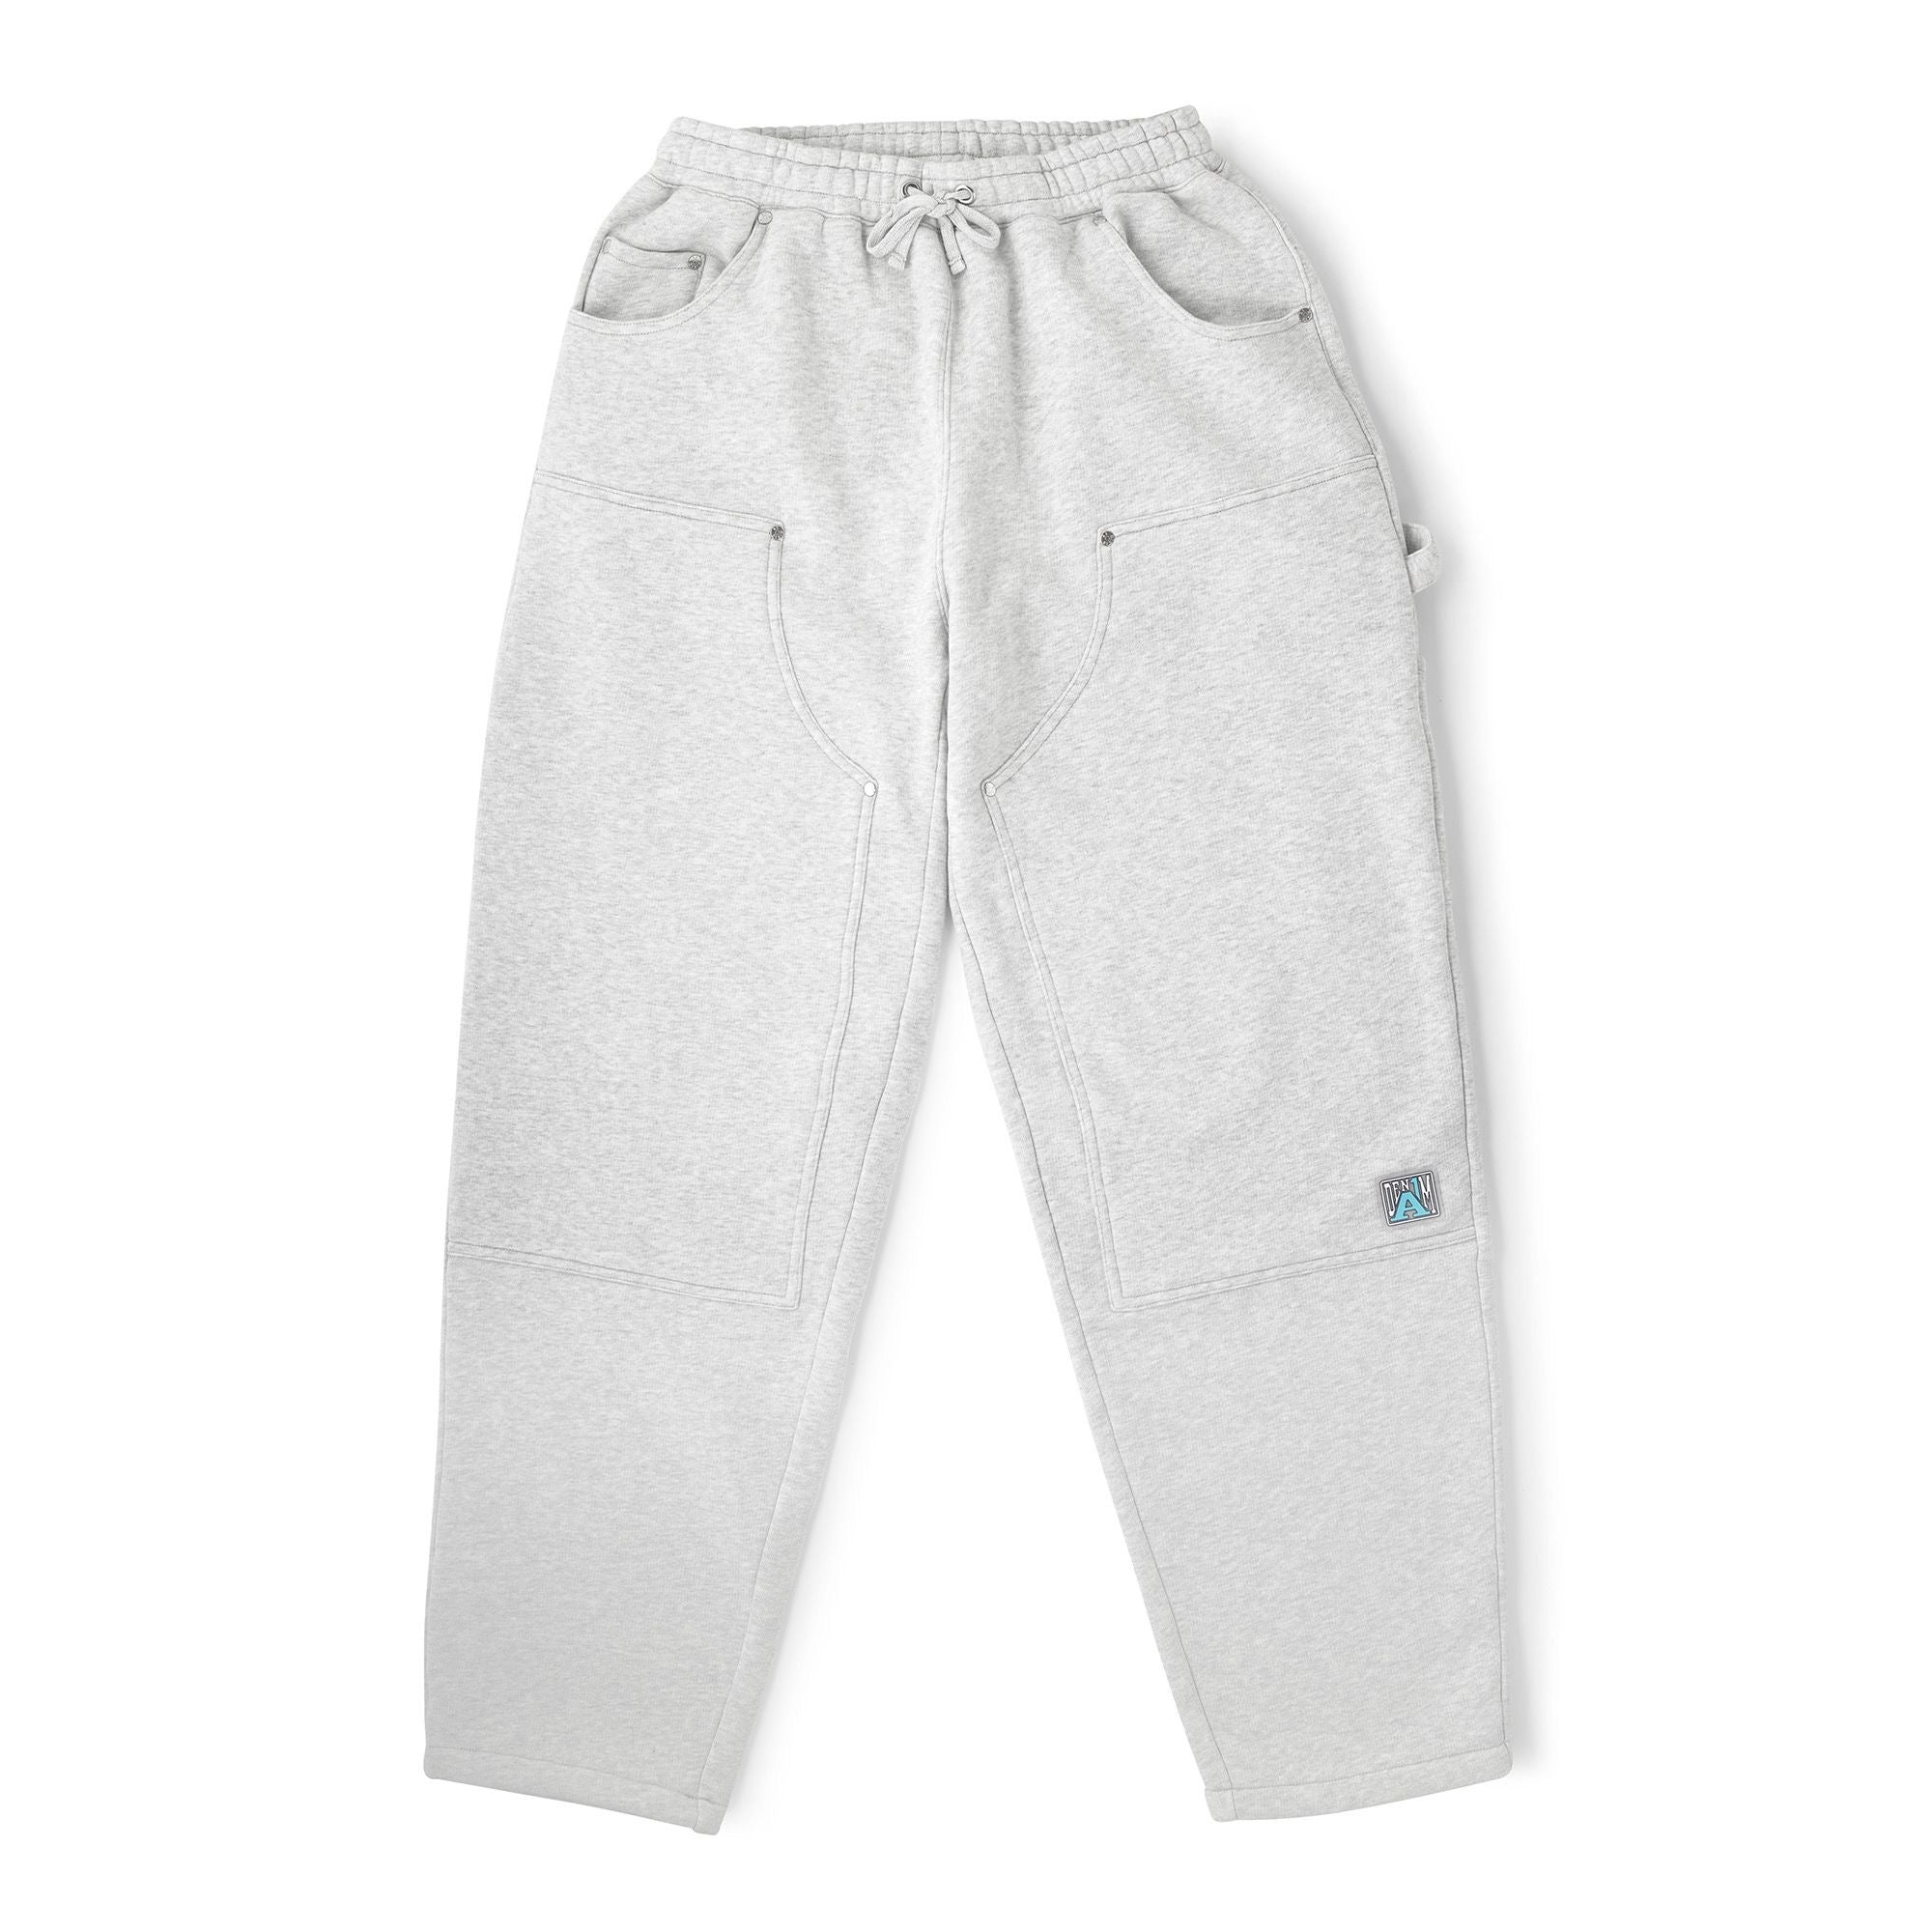 A1 Double Knee Sweat Pant - Grey Marle